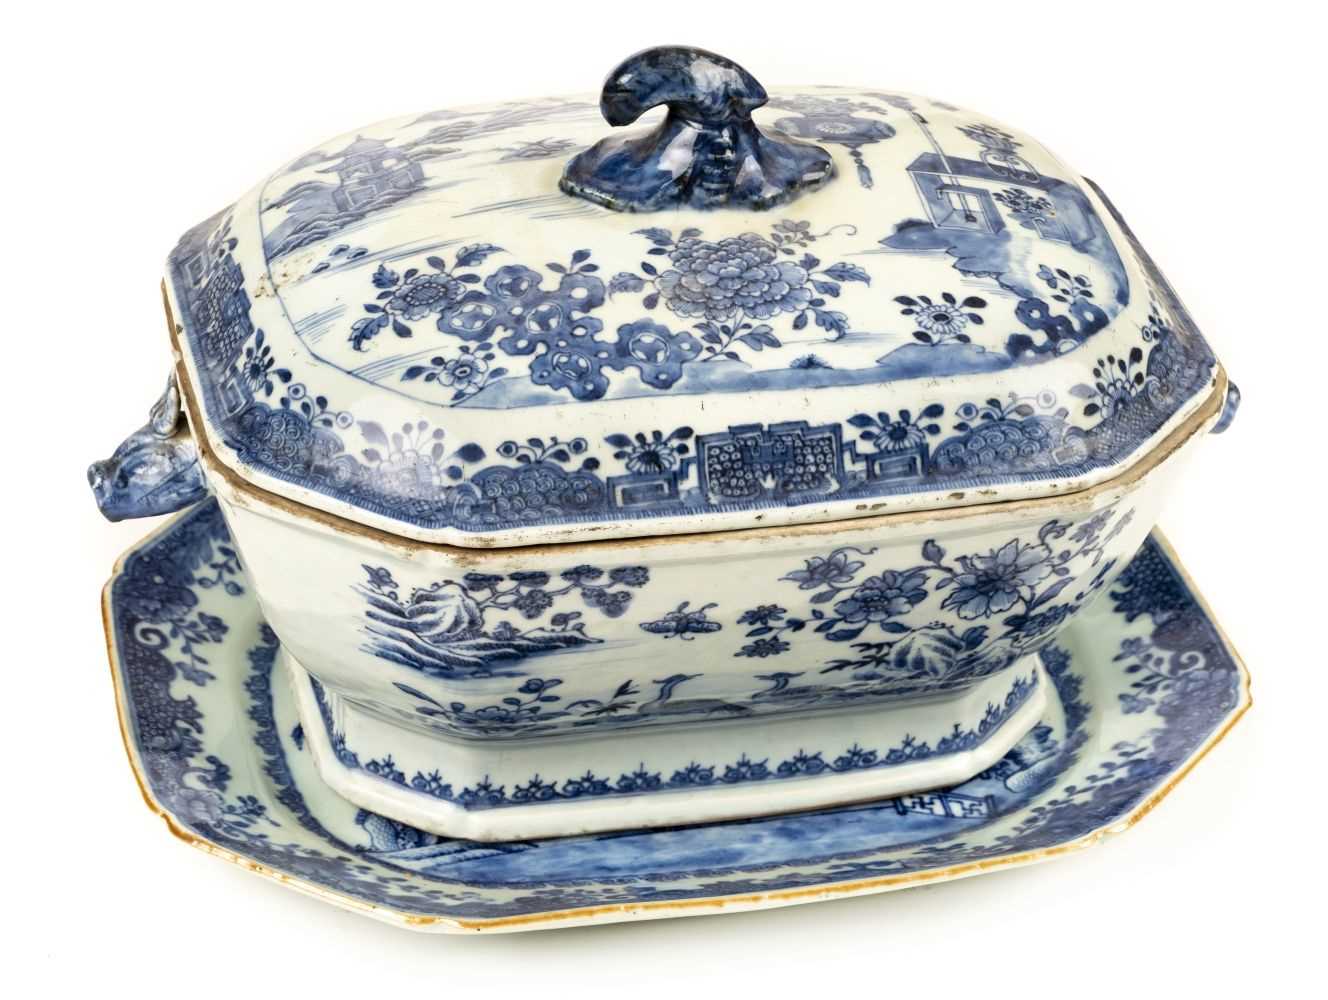 Lot 99 - Tureen. An 18th century Chinese porcelain blue and white tureen and cover